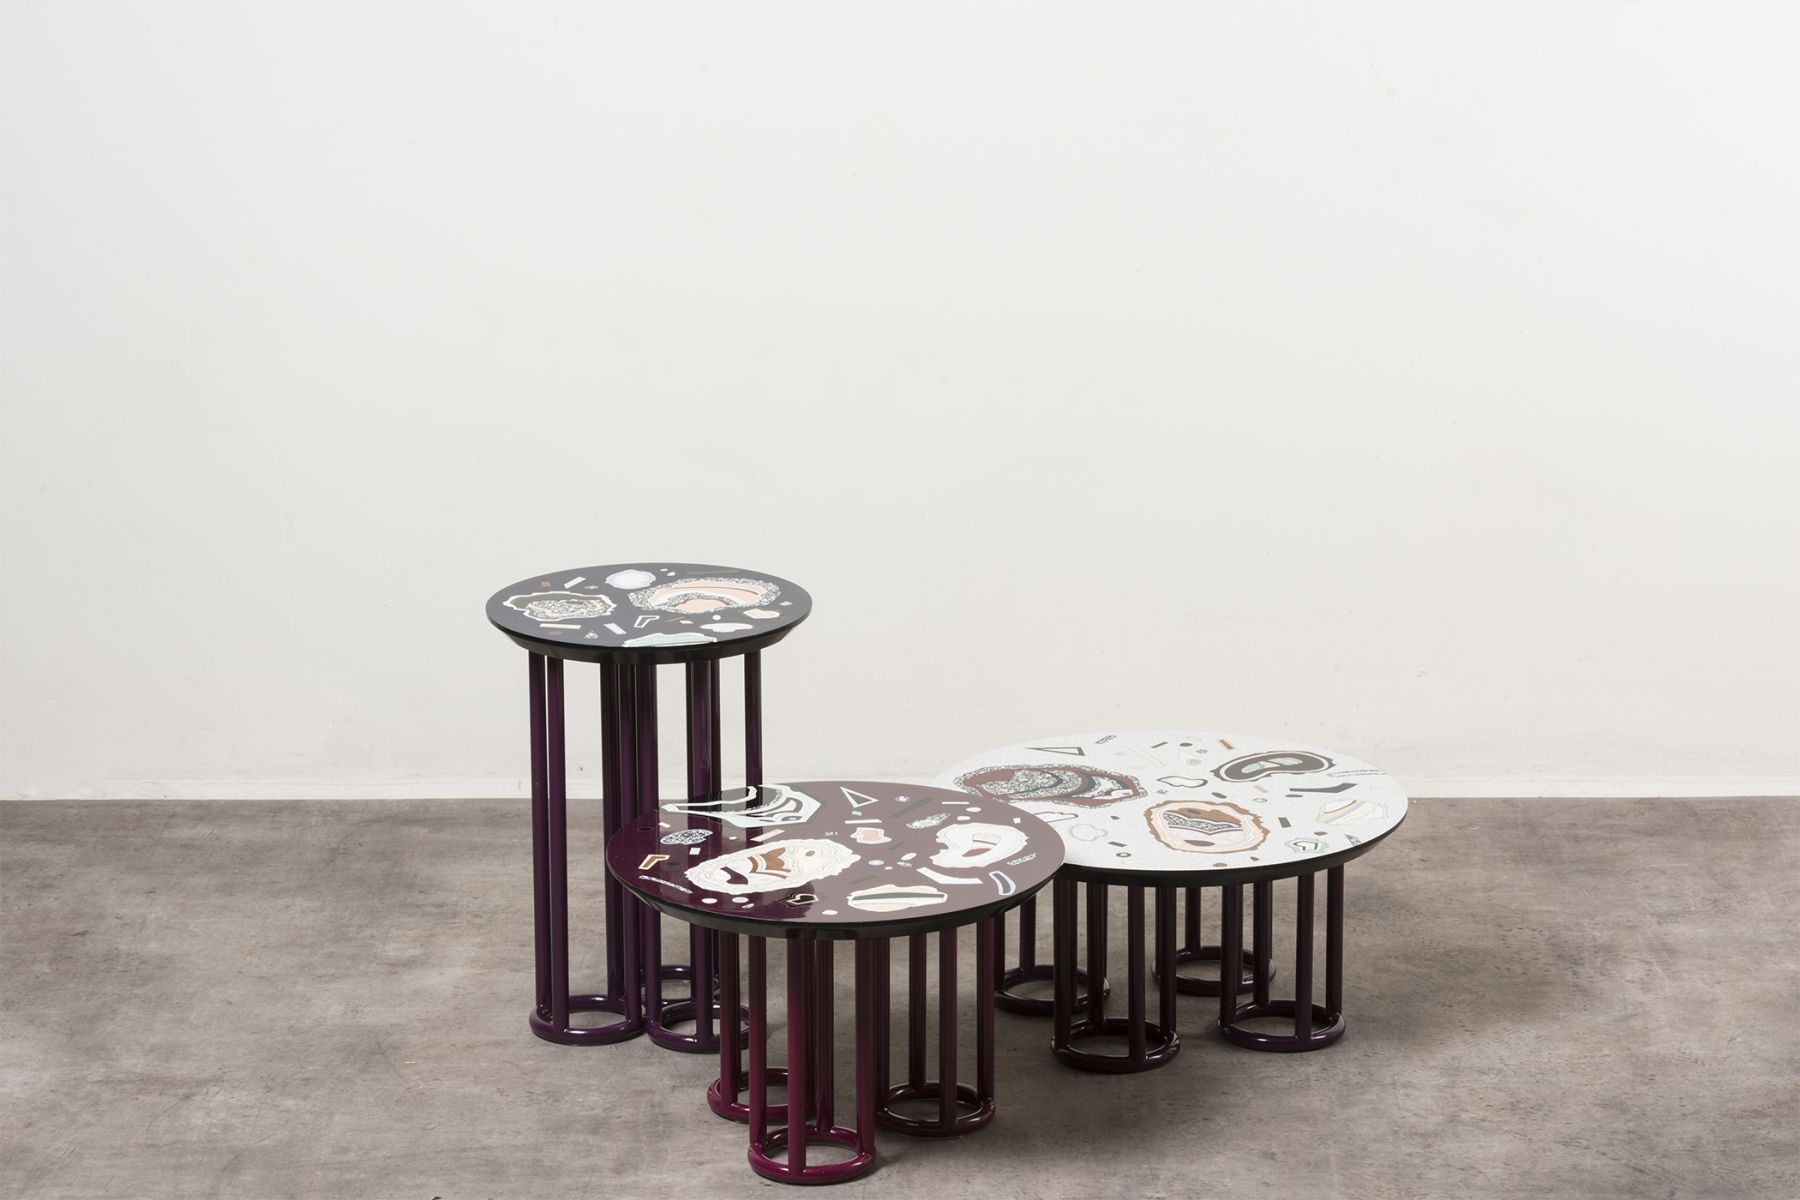 Low table 'Hot Rock' Bethan Laura Wood pic-4